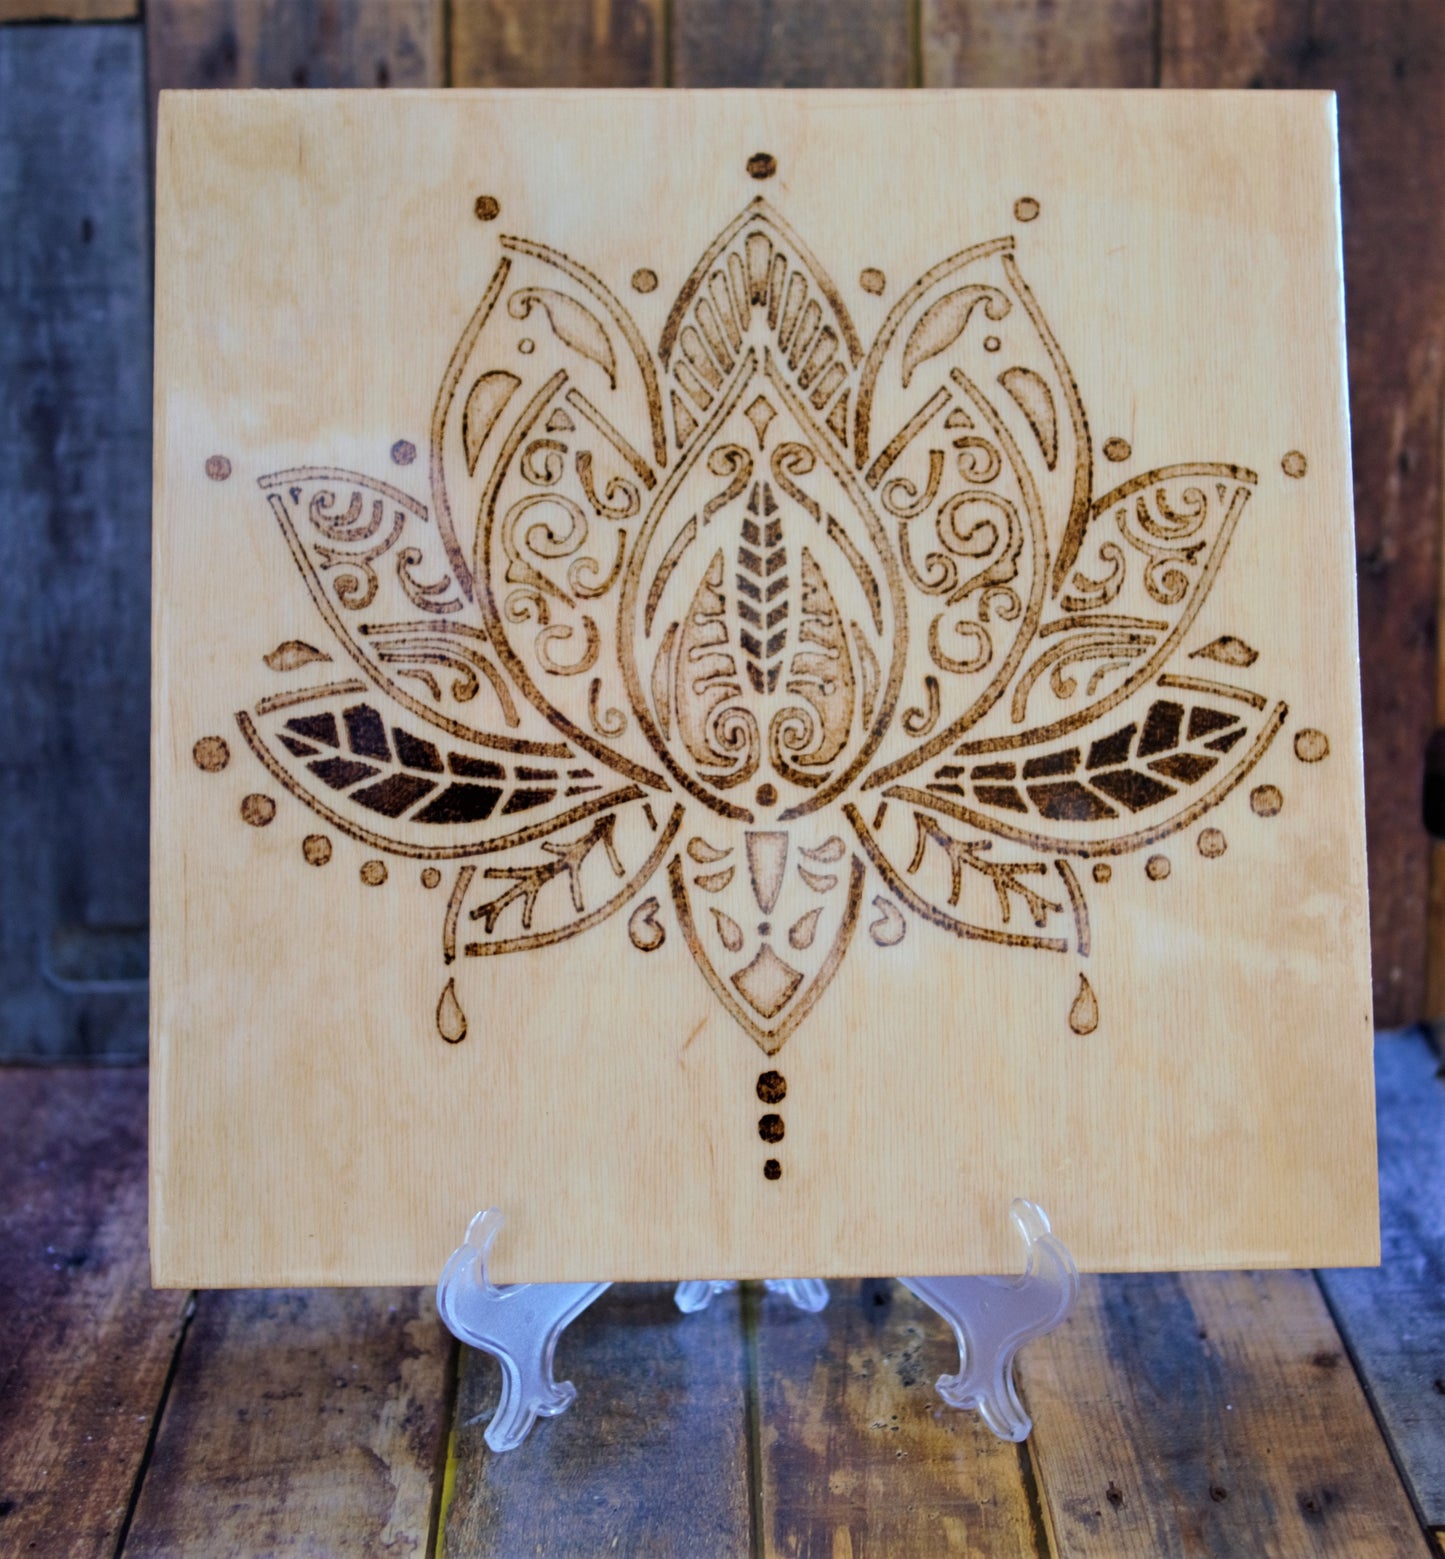 Lotus Flower-#1 Hand-Crafted Wood burning (Pyrography) on Birch